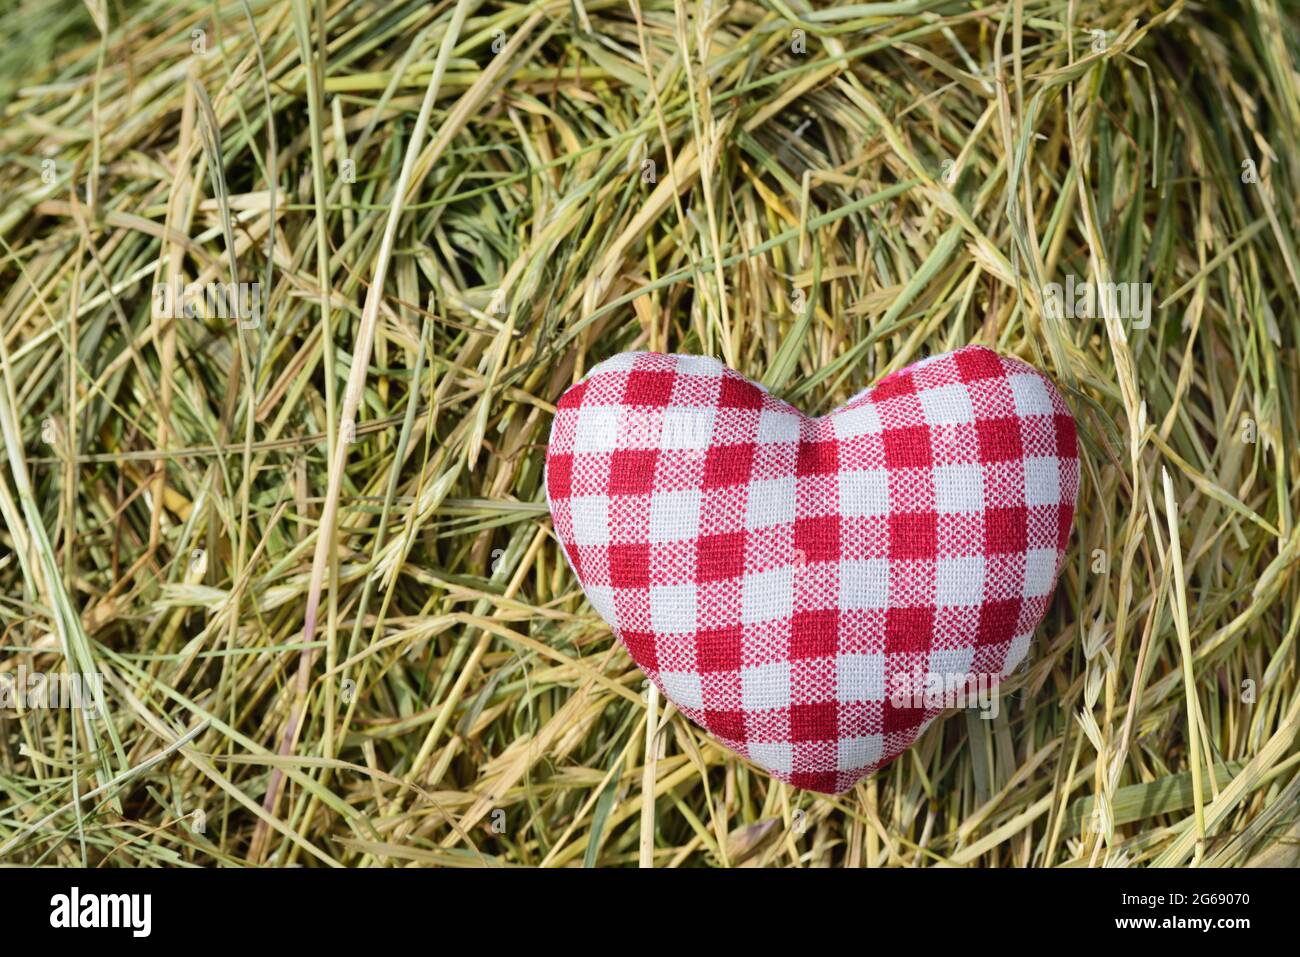 On a background of hay lies a small heart made of checked red and white fabric for a rural idyll Stock Photo